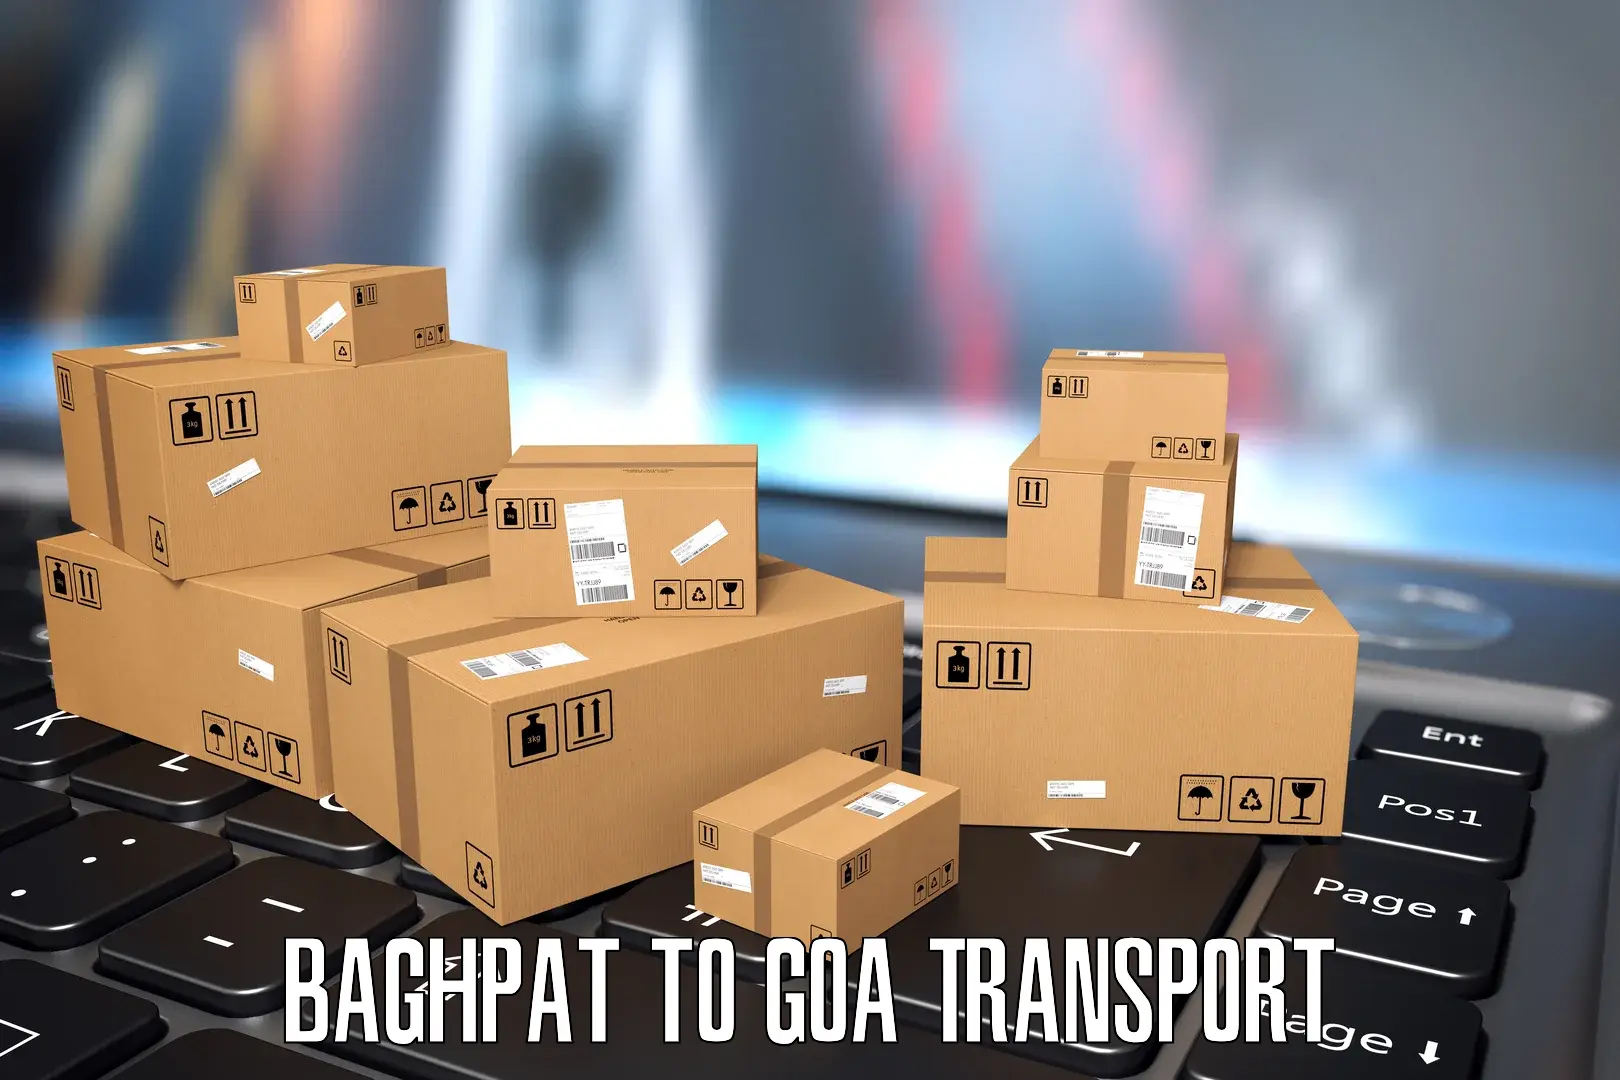 Nearby transport service Baghpat to South Goa